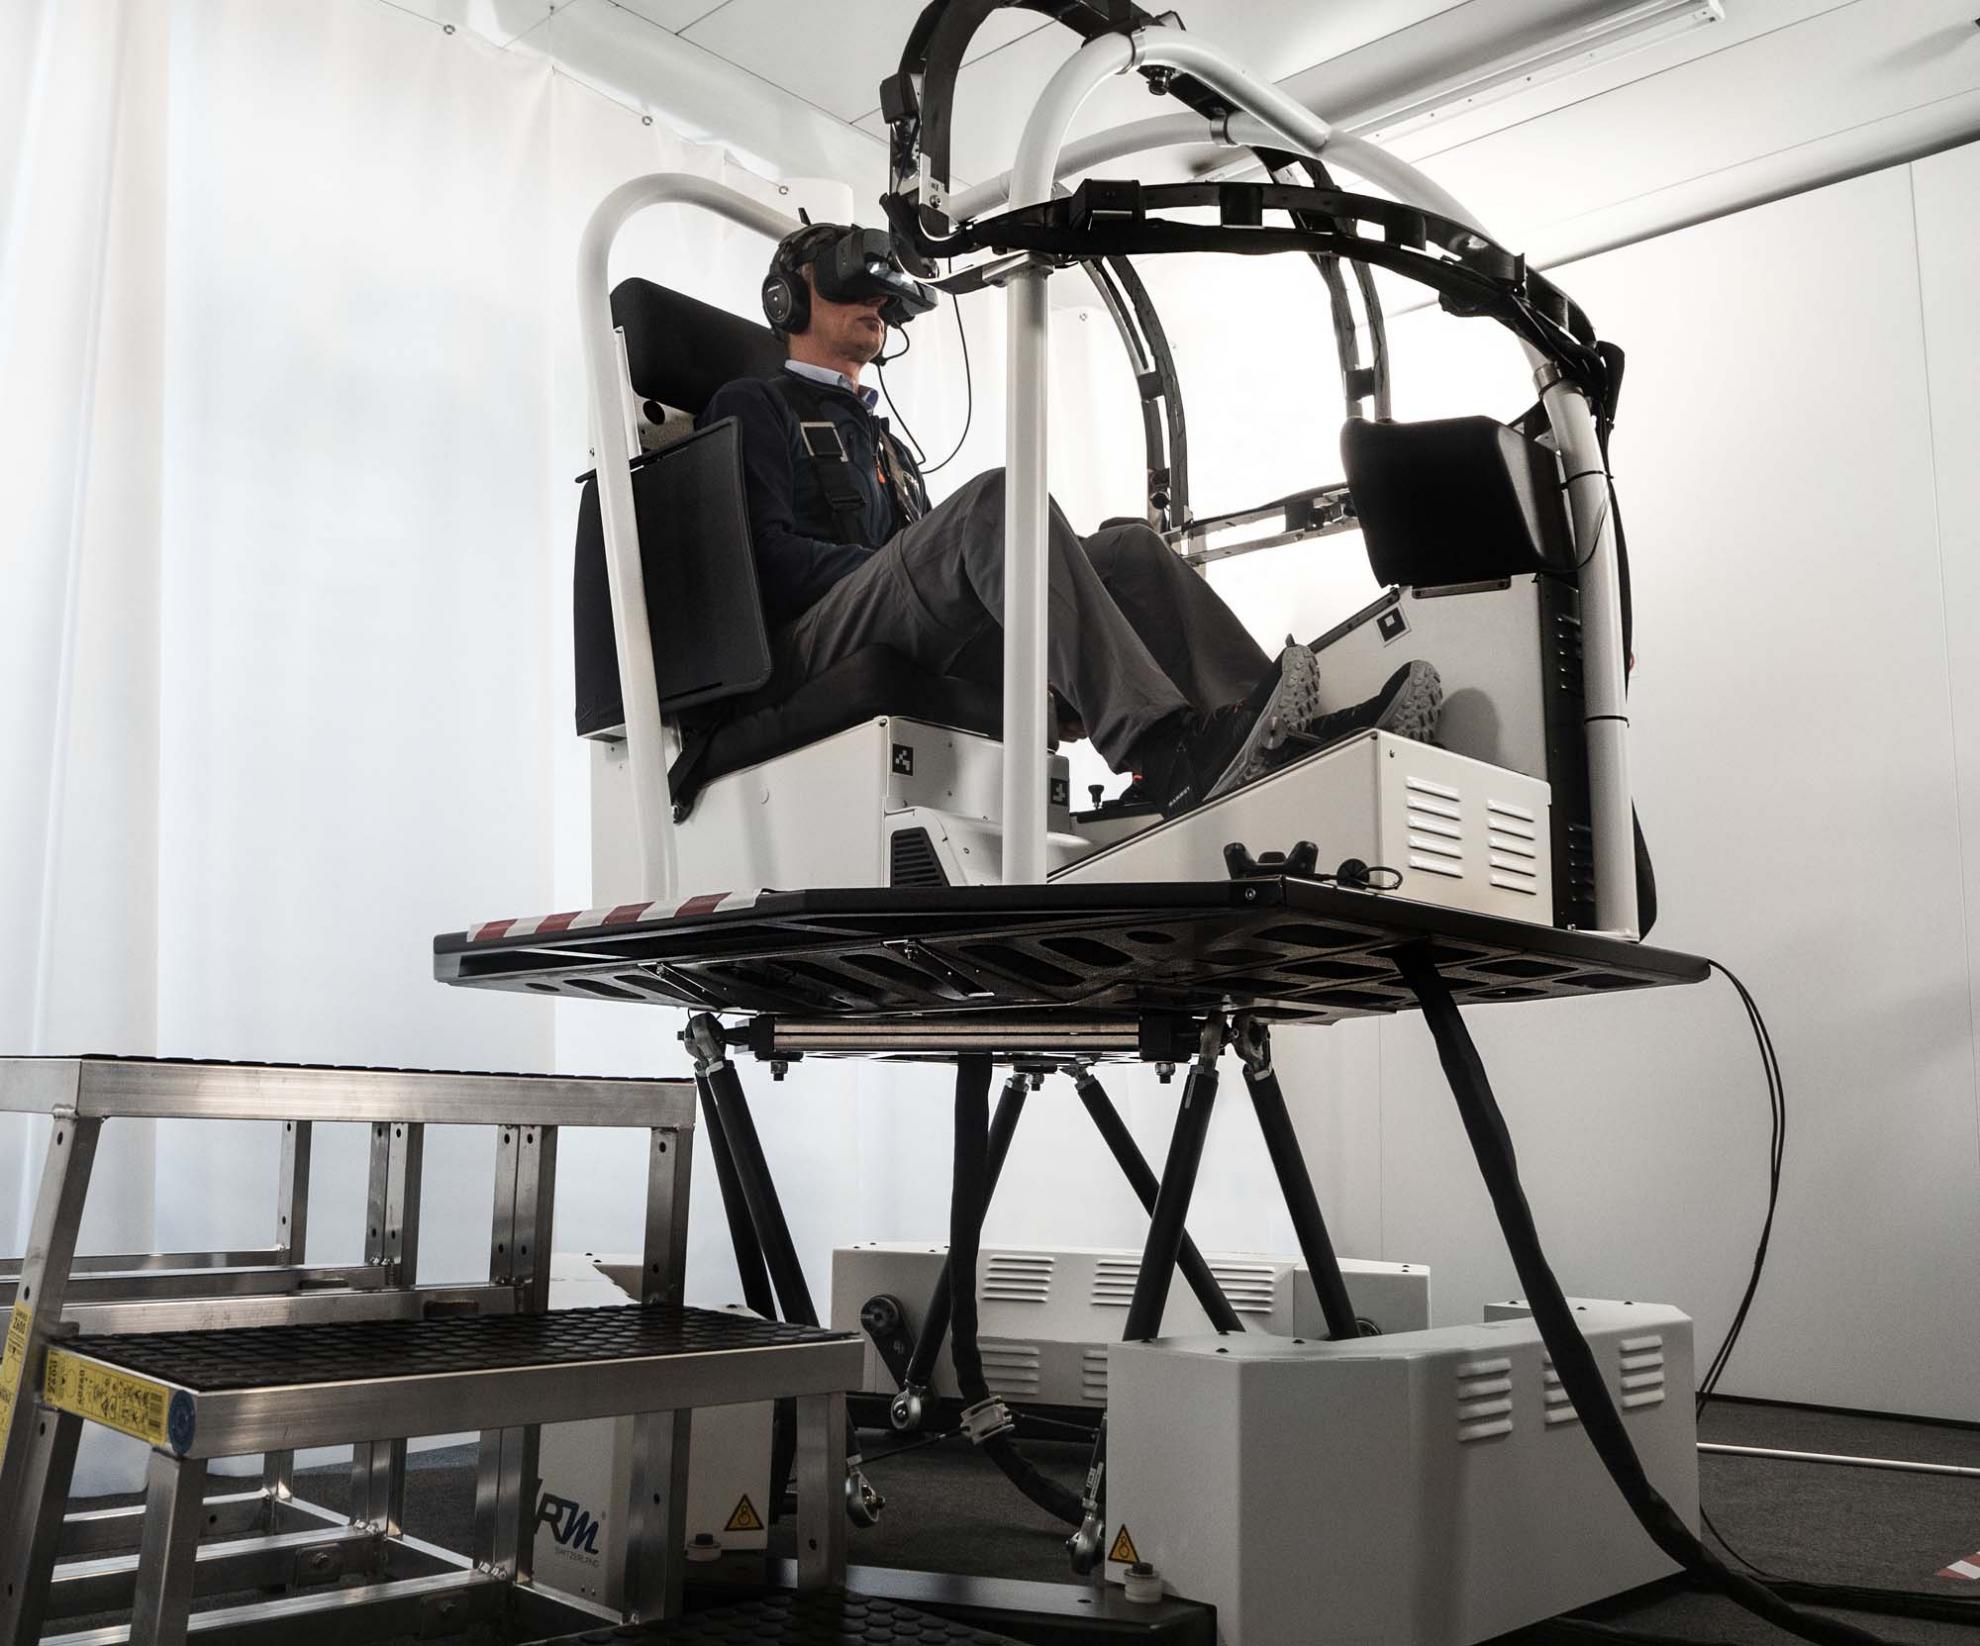 The first EASA-approved flight training simulator by VRM Switzerland